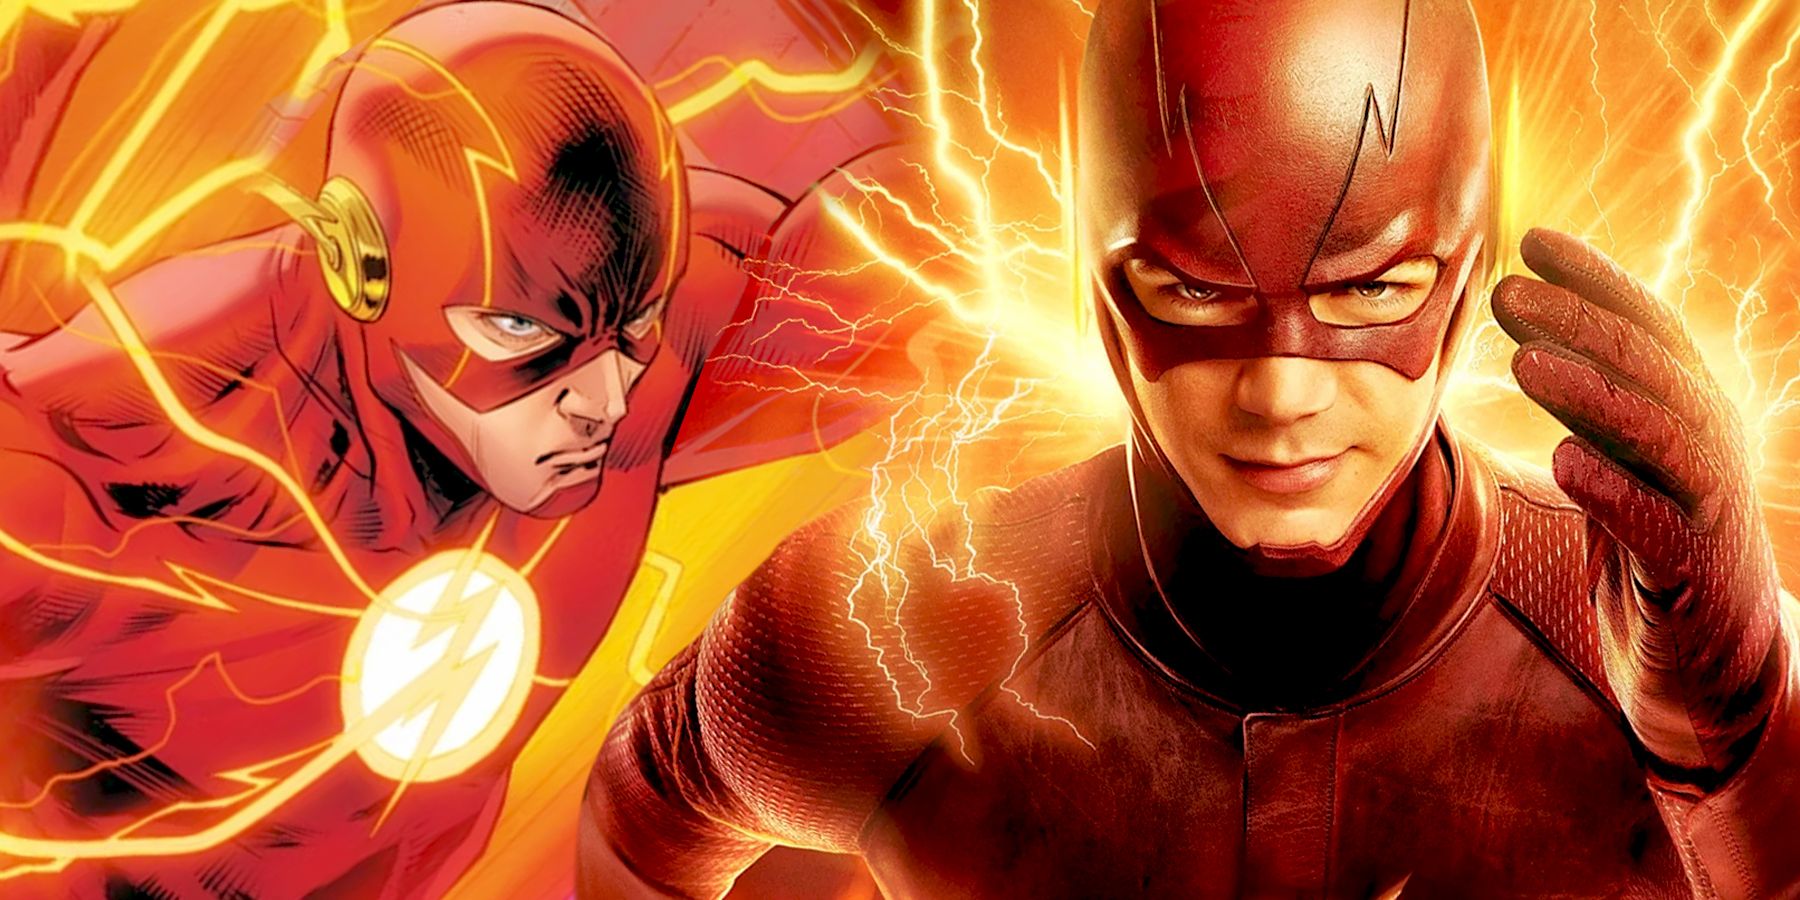 The Flash as seen in DC Comics and The Flash as seen in CW's tv show The Flash